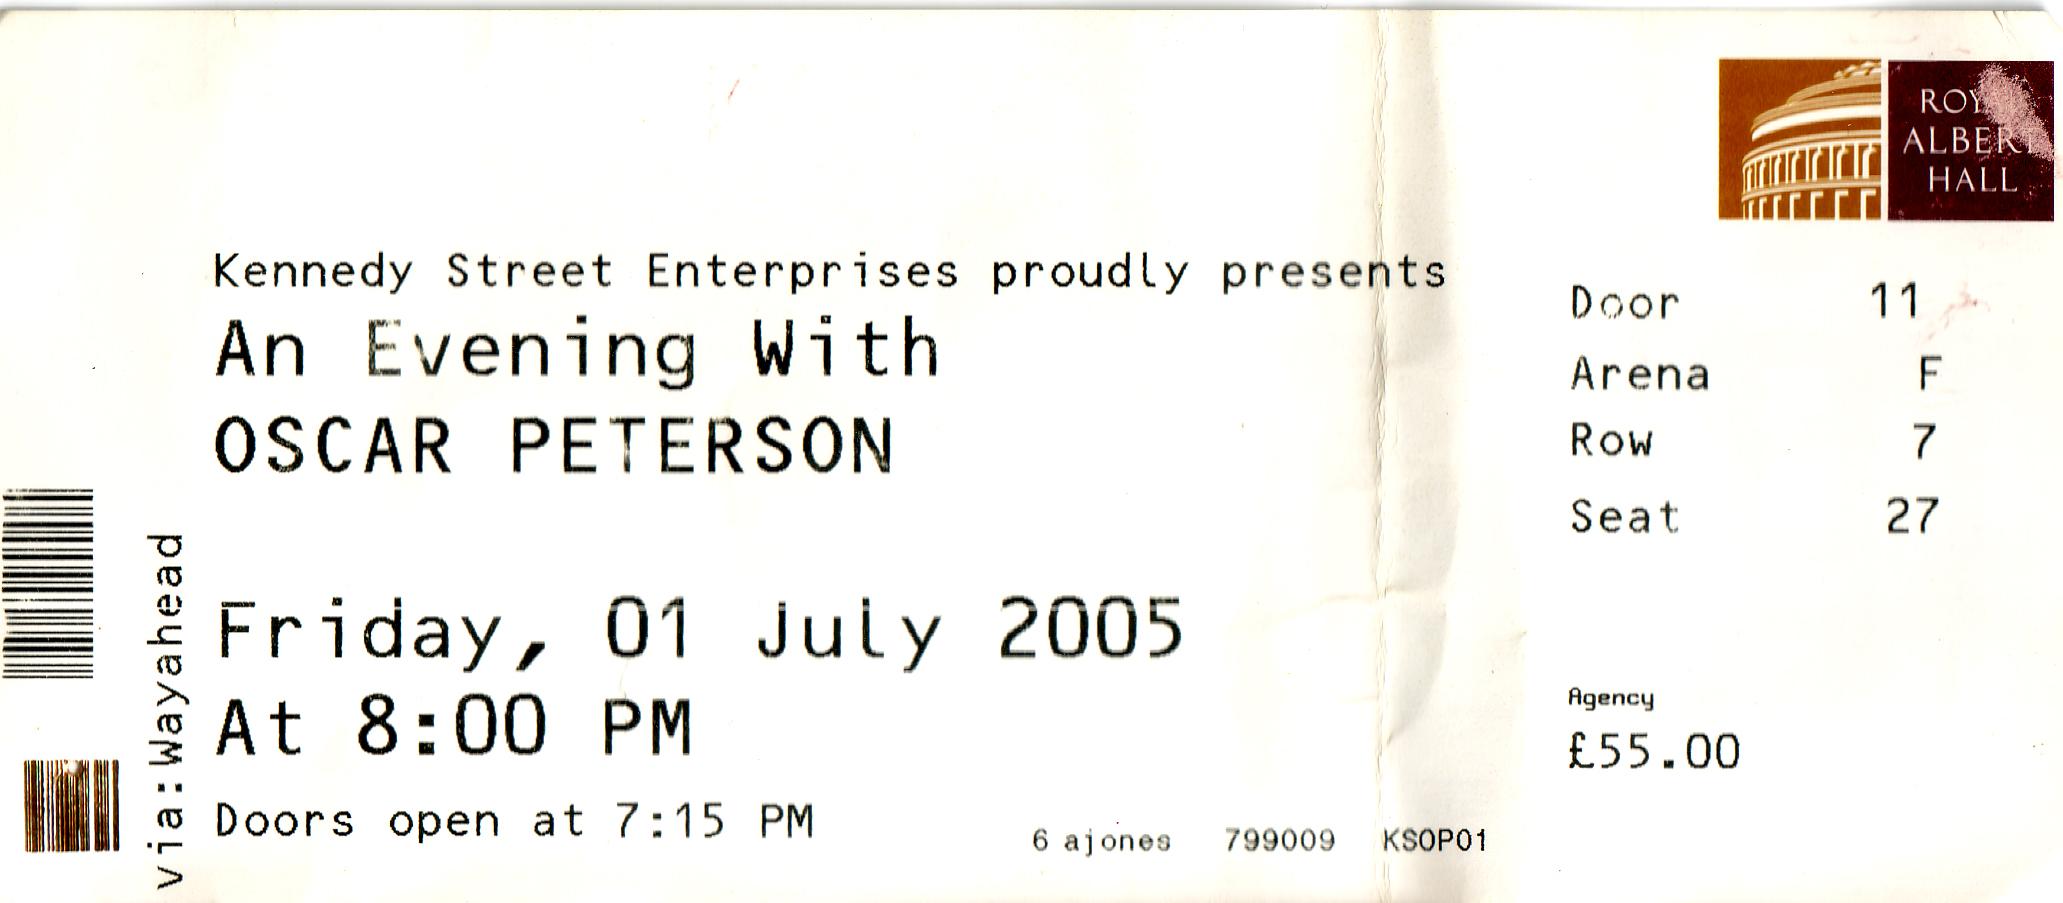 2005-07-01-An Evening With Oscar Peterson